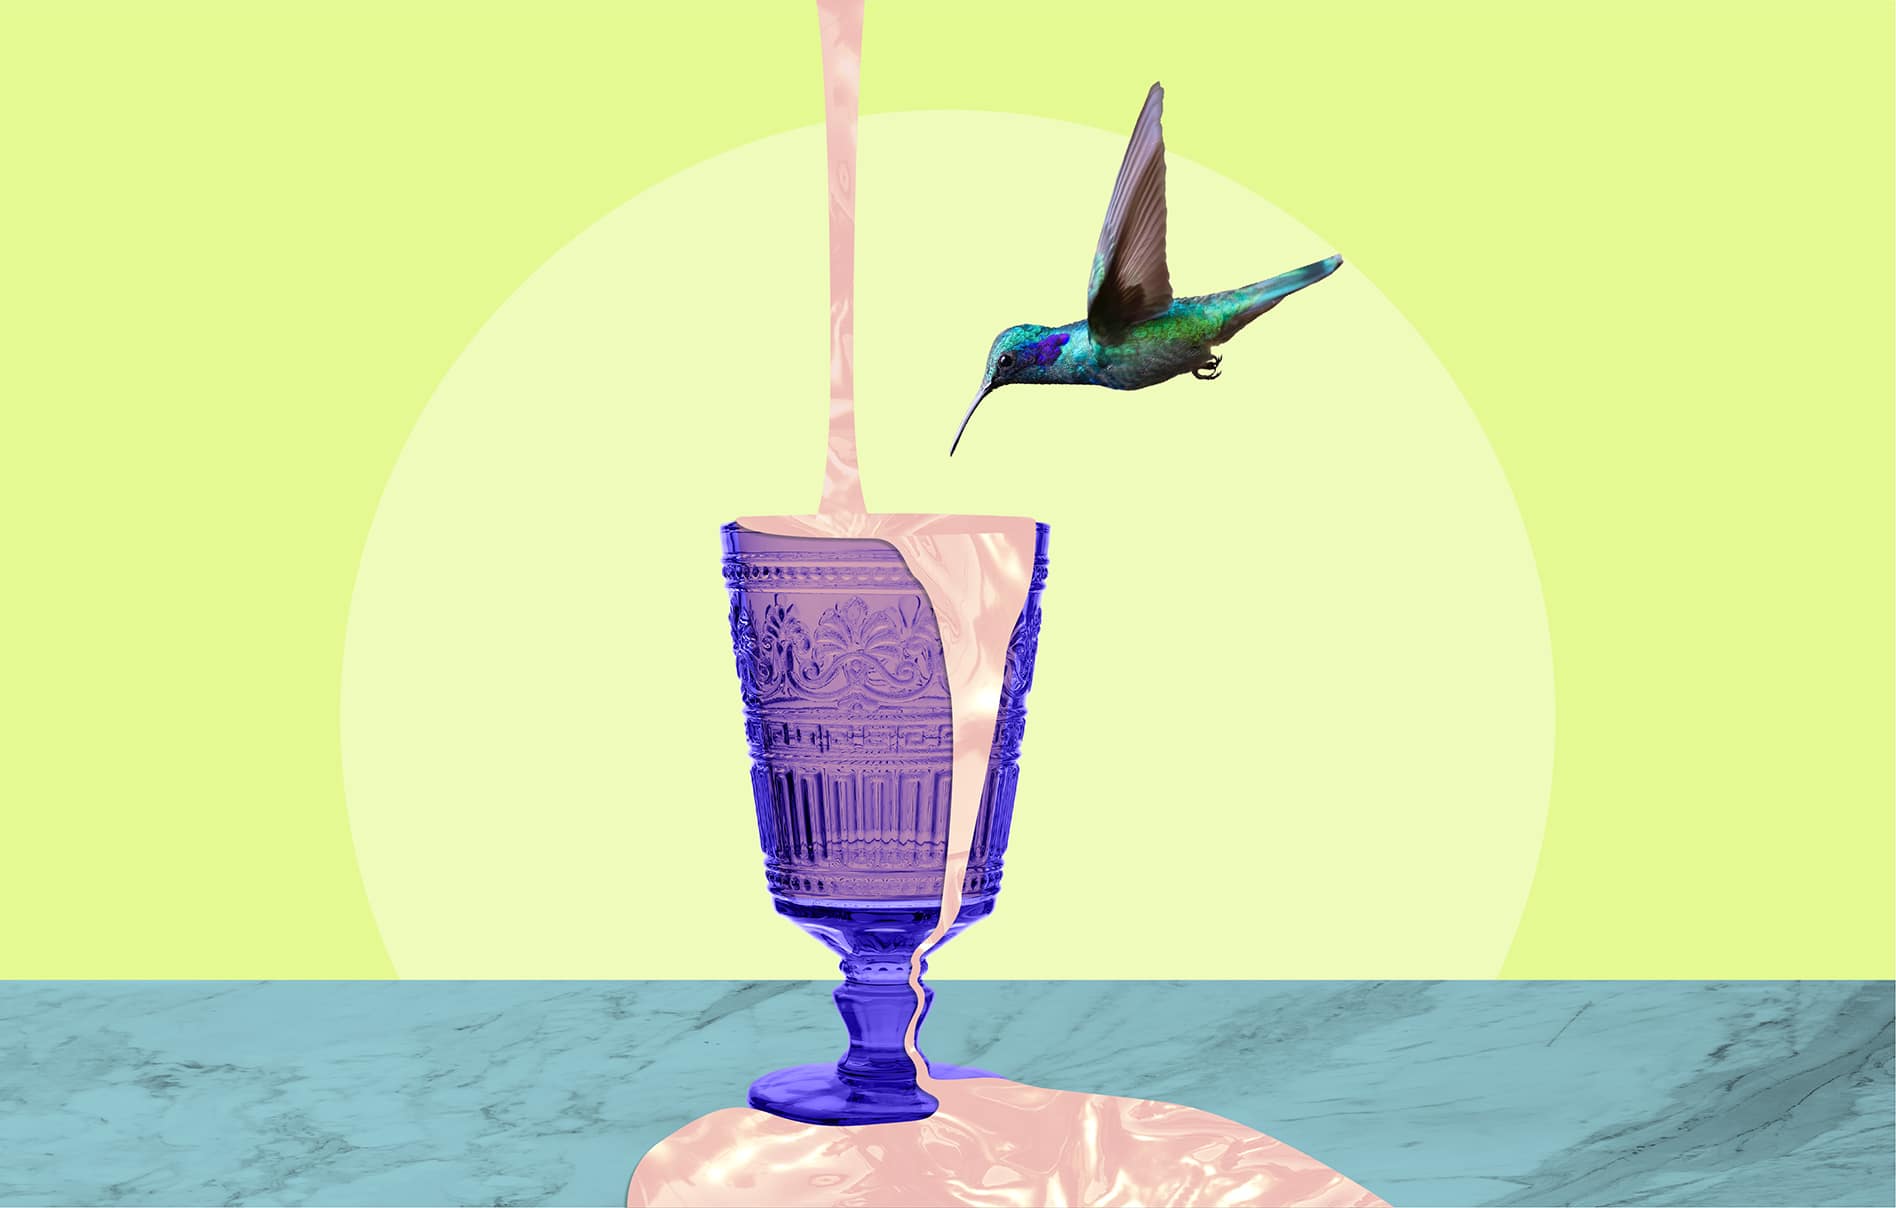 A hummingbird takes a sip from an overflowing cup.